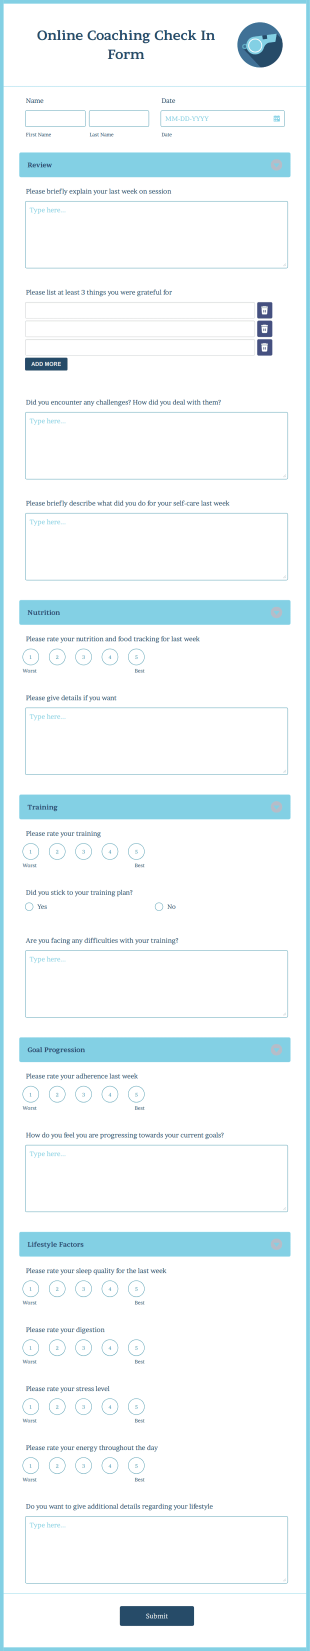 Online Coaching Check In Form Template